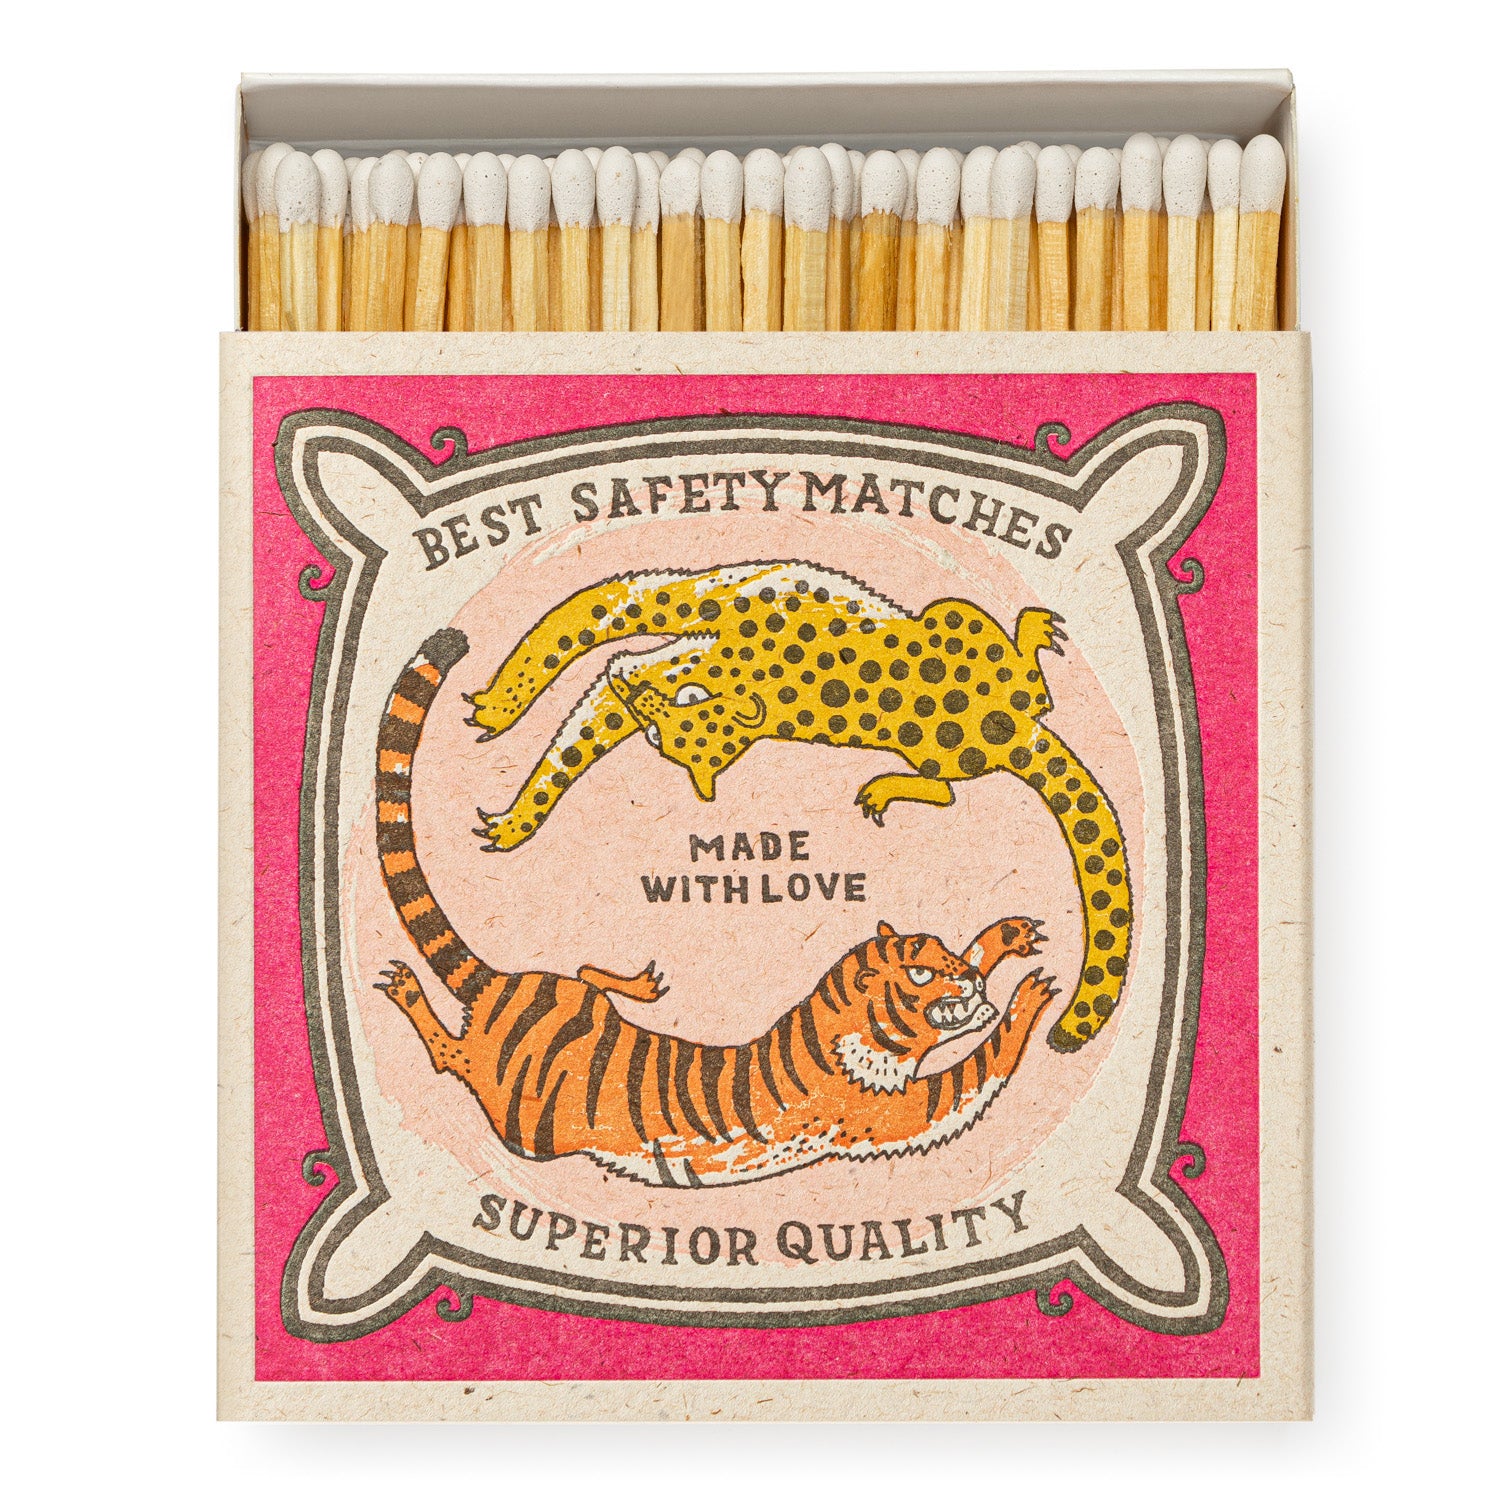 Long Matches - Square Box | Chasing Big Cats | by Archivist - Lifestory